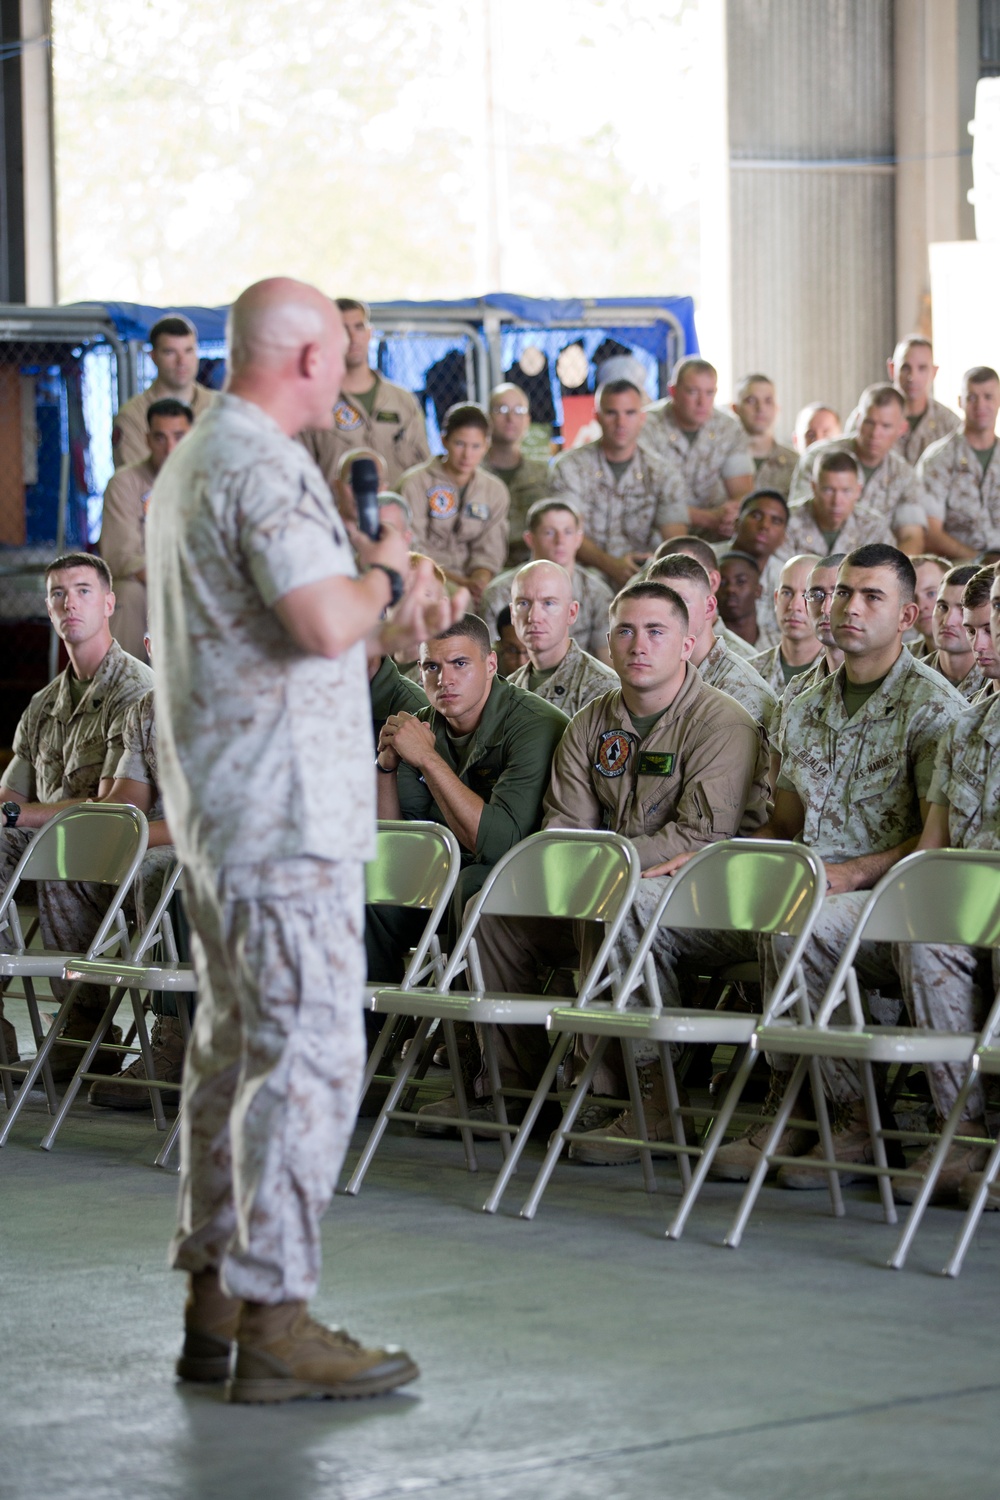 CMC and SMMC Visit SP MAGTF-CR Marines in Moron, Spain